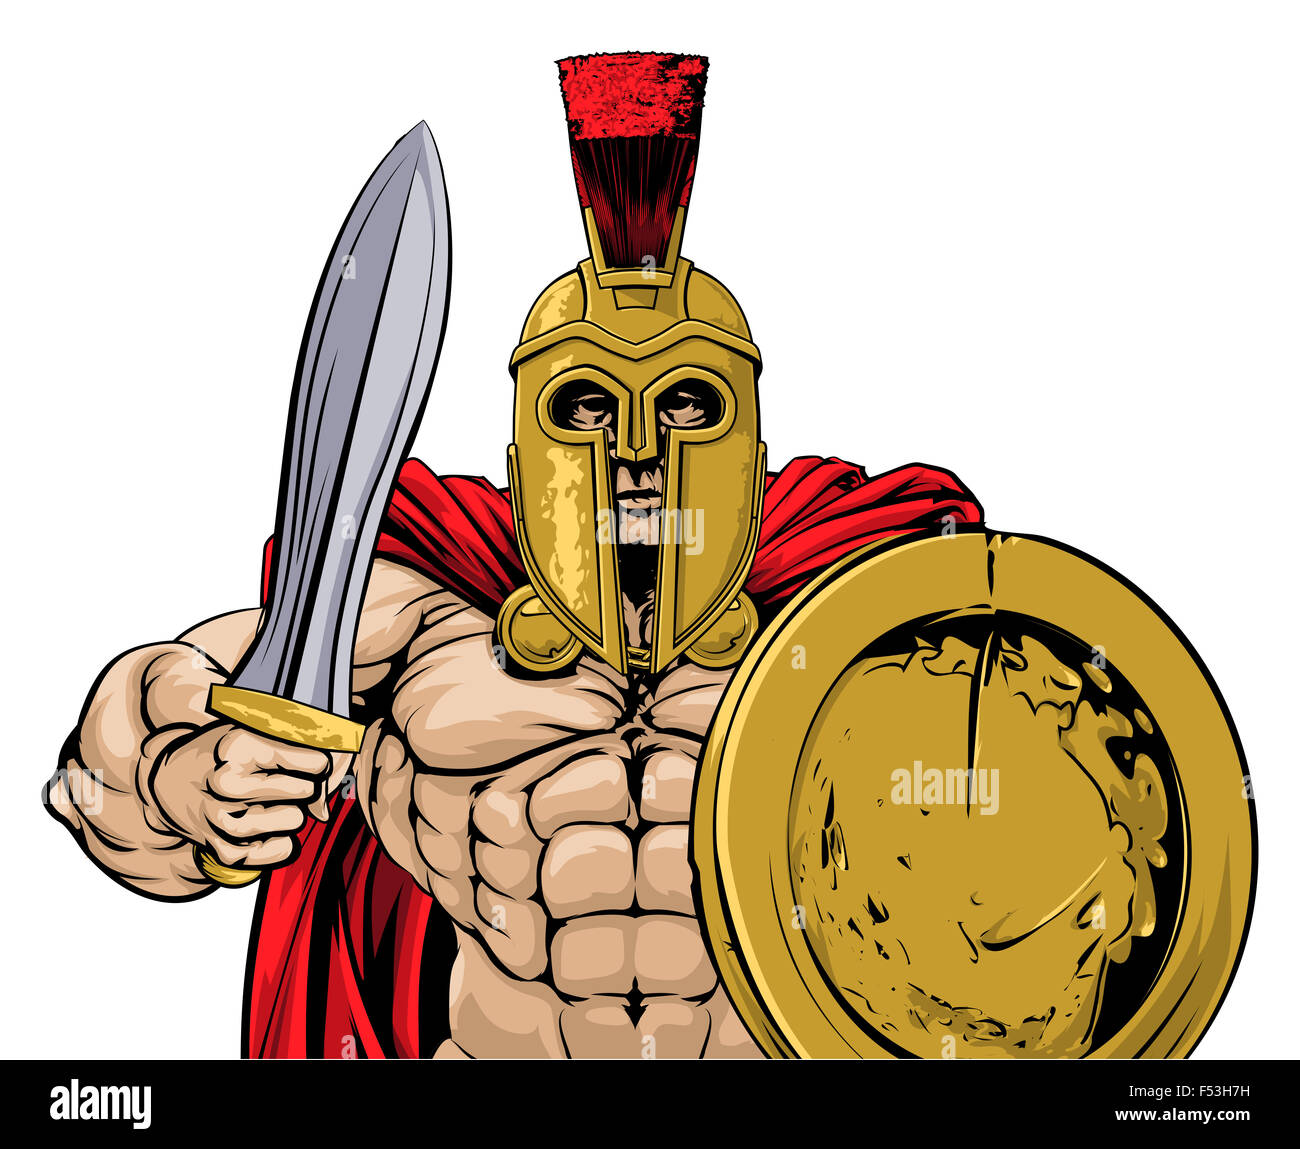 An illustration of a gladiator, ancient Greek, Trojan or Roman warrior or gladiator wearing a helmet and holding a sword and rou Stock Photo